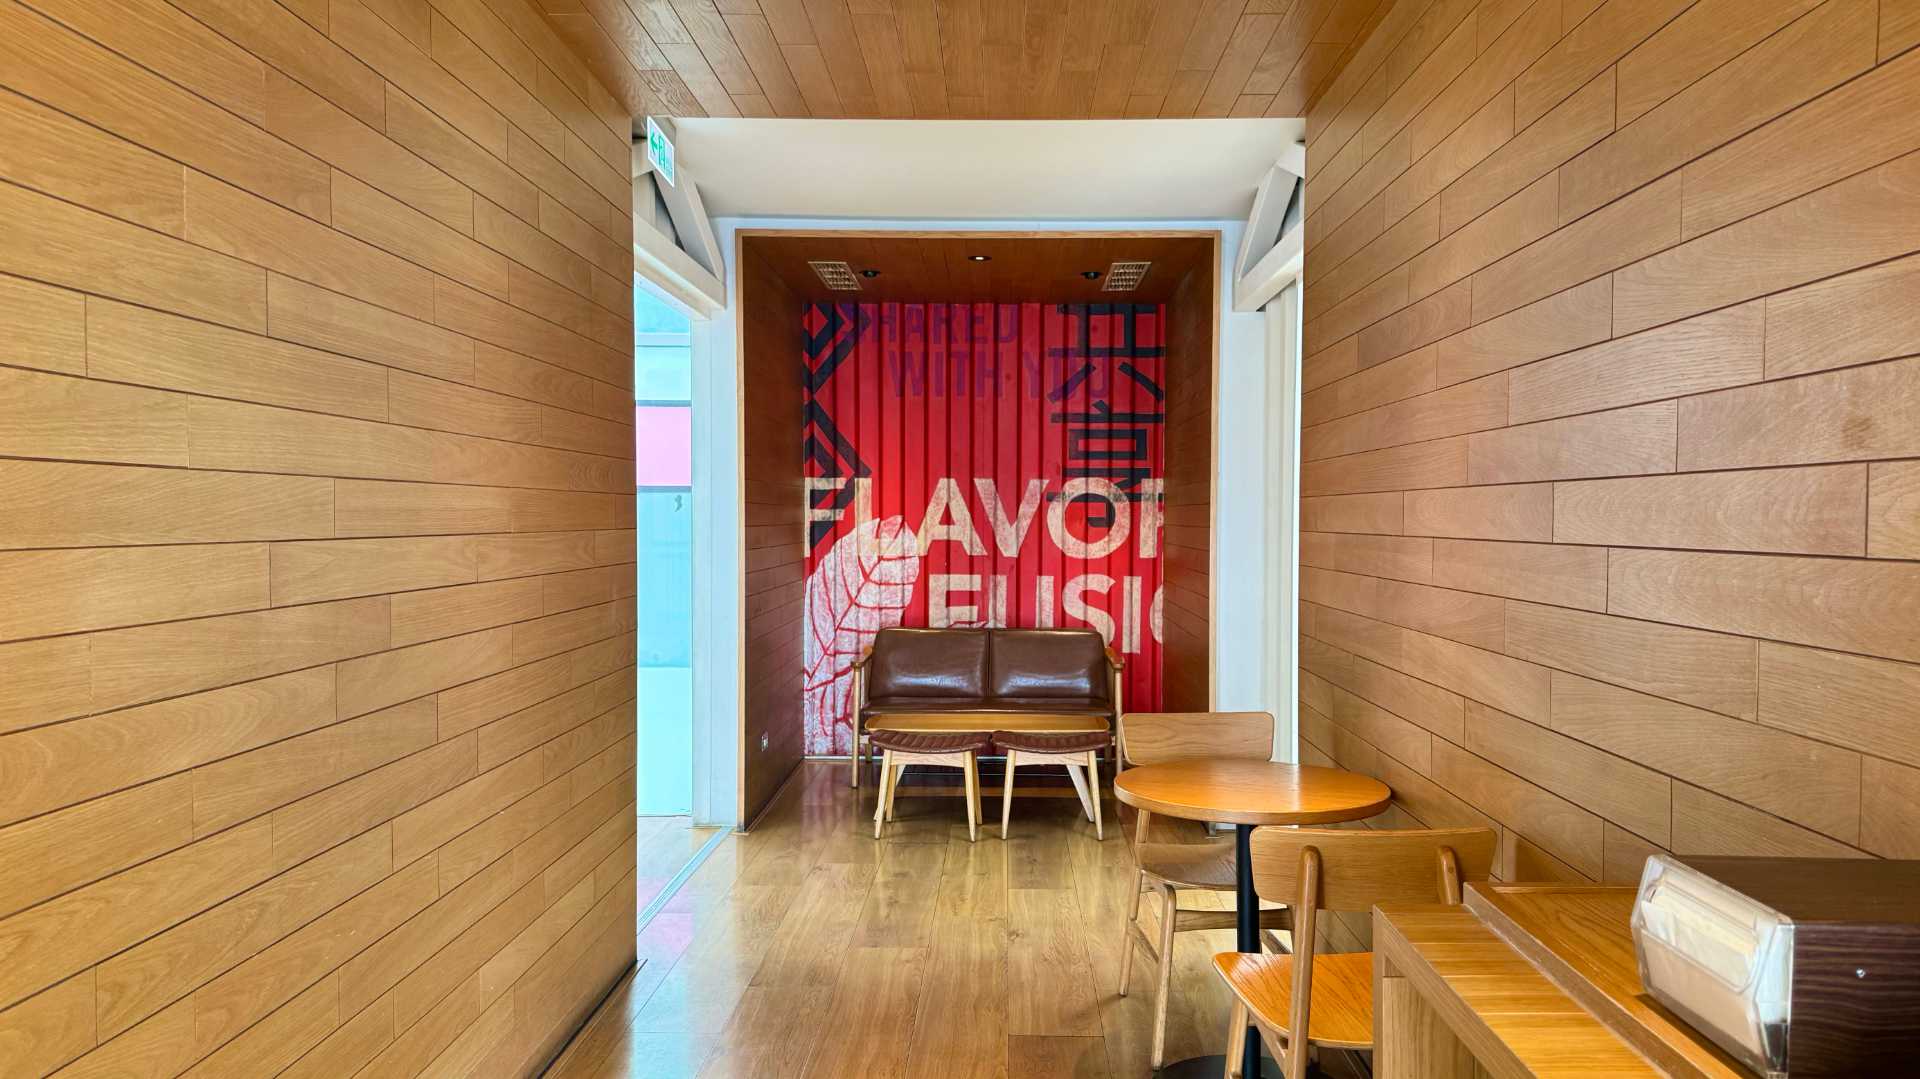 A two-seater leather couch in a small nook, with the words ‘flavor’ and ‘fusion’ on a bold mural behind it.